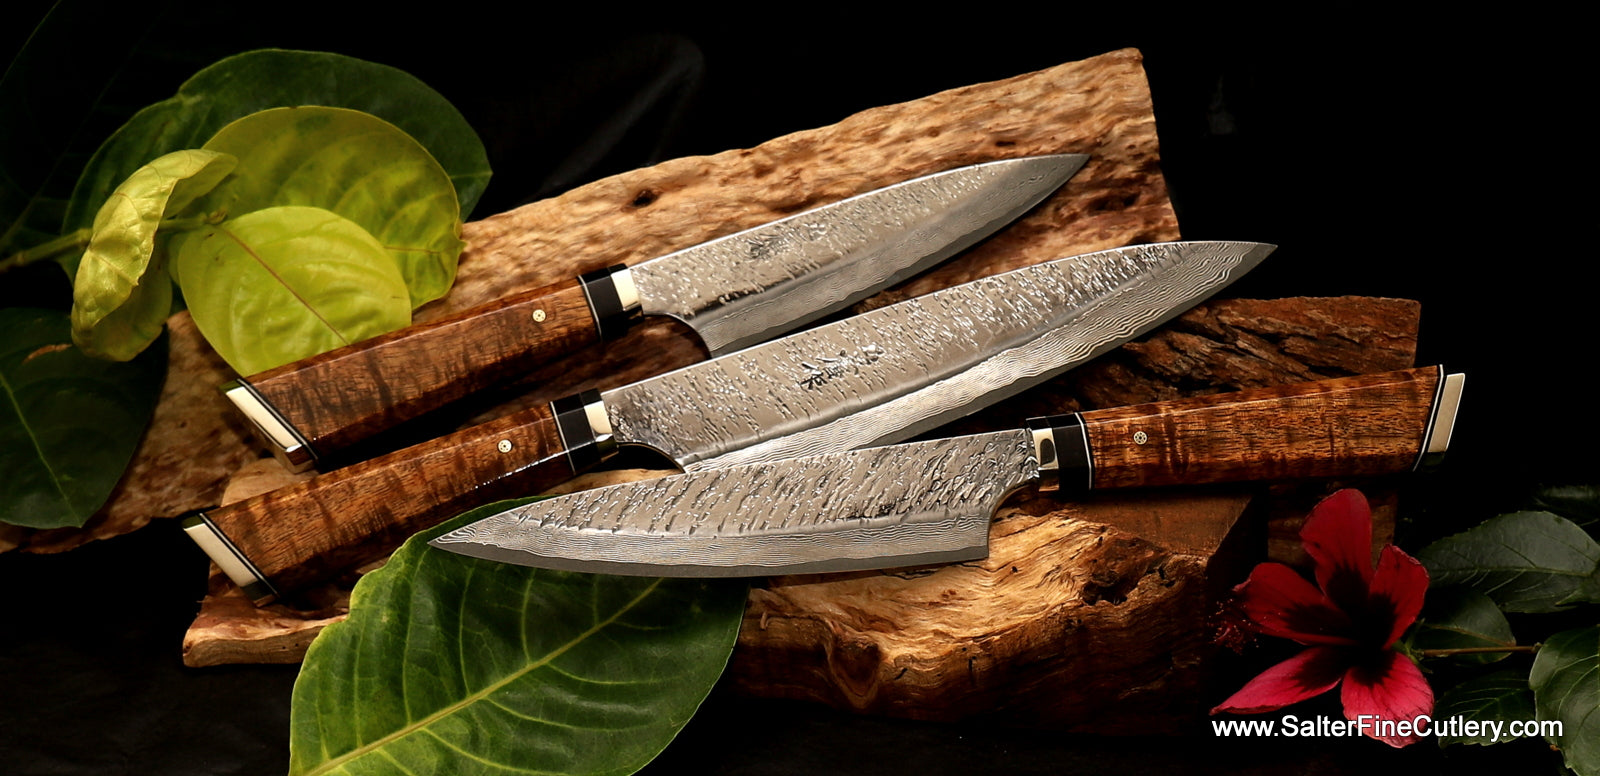 Custom exclusive design raptor collection chef knives for professional chefs or home cooking kitchens from Salter Fine Cutlery of Hawaii